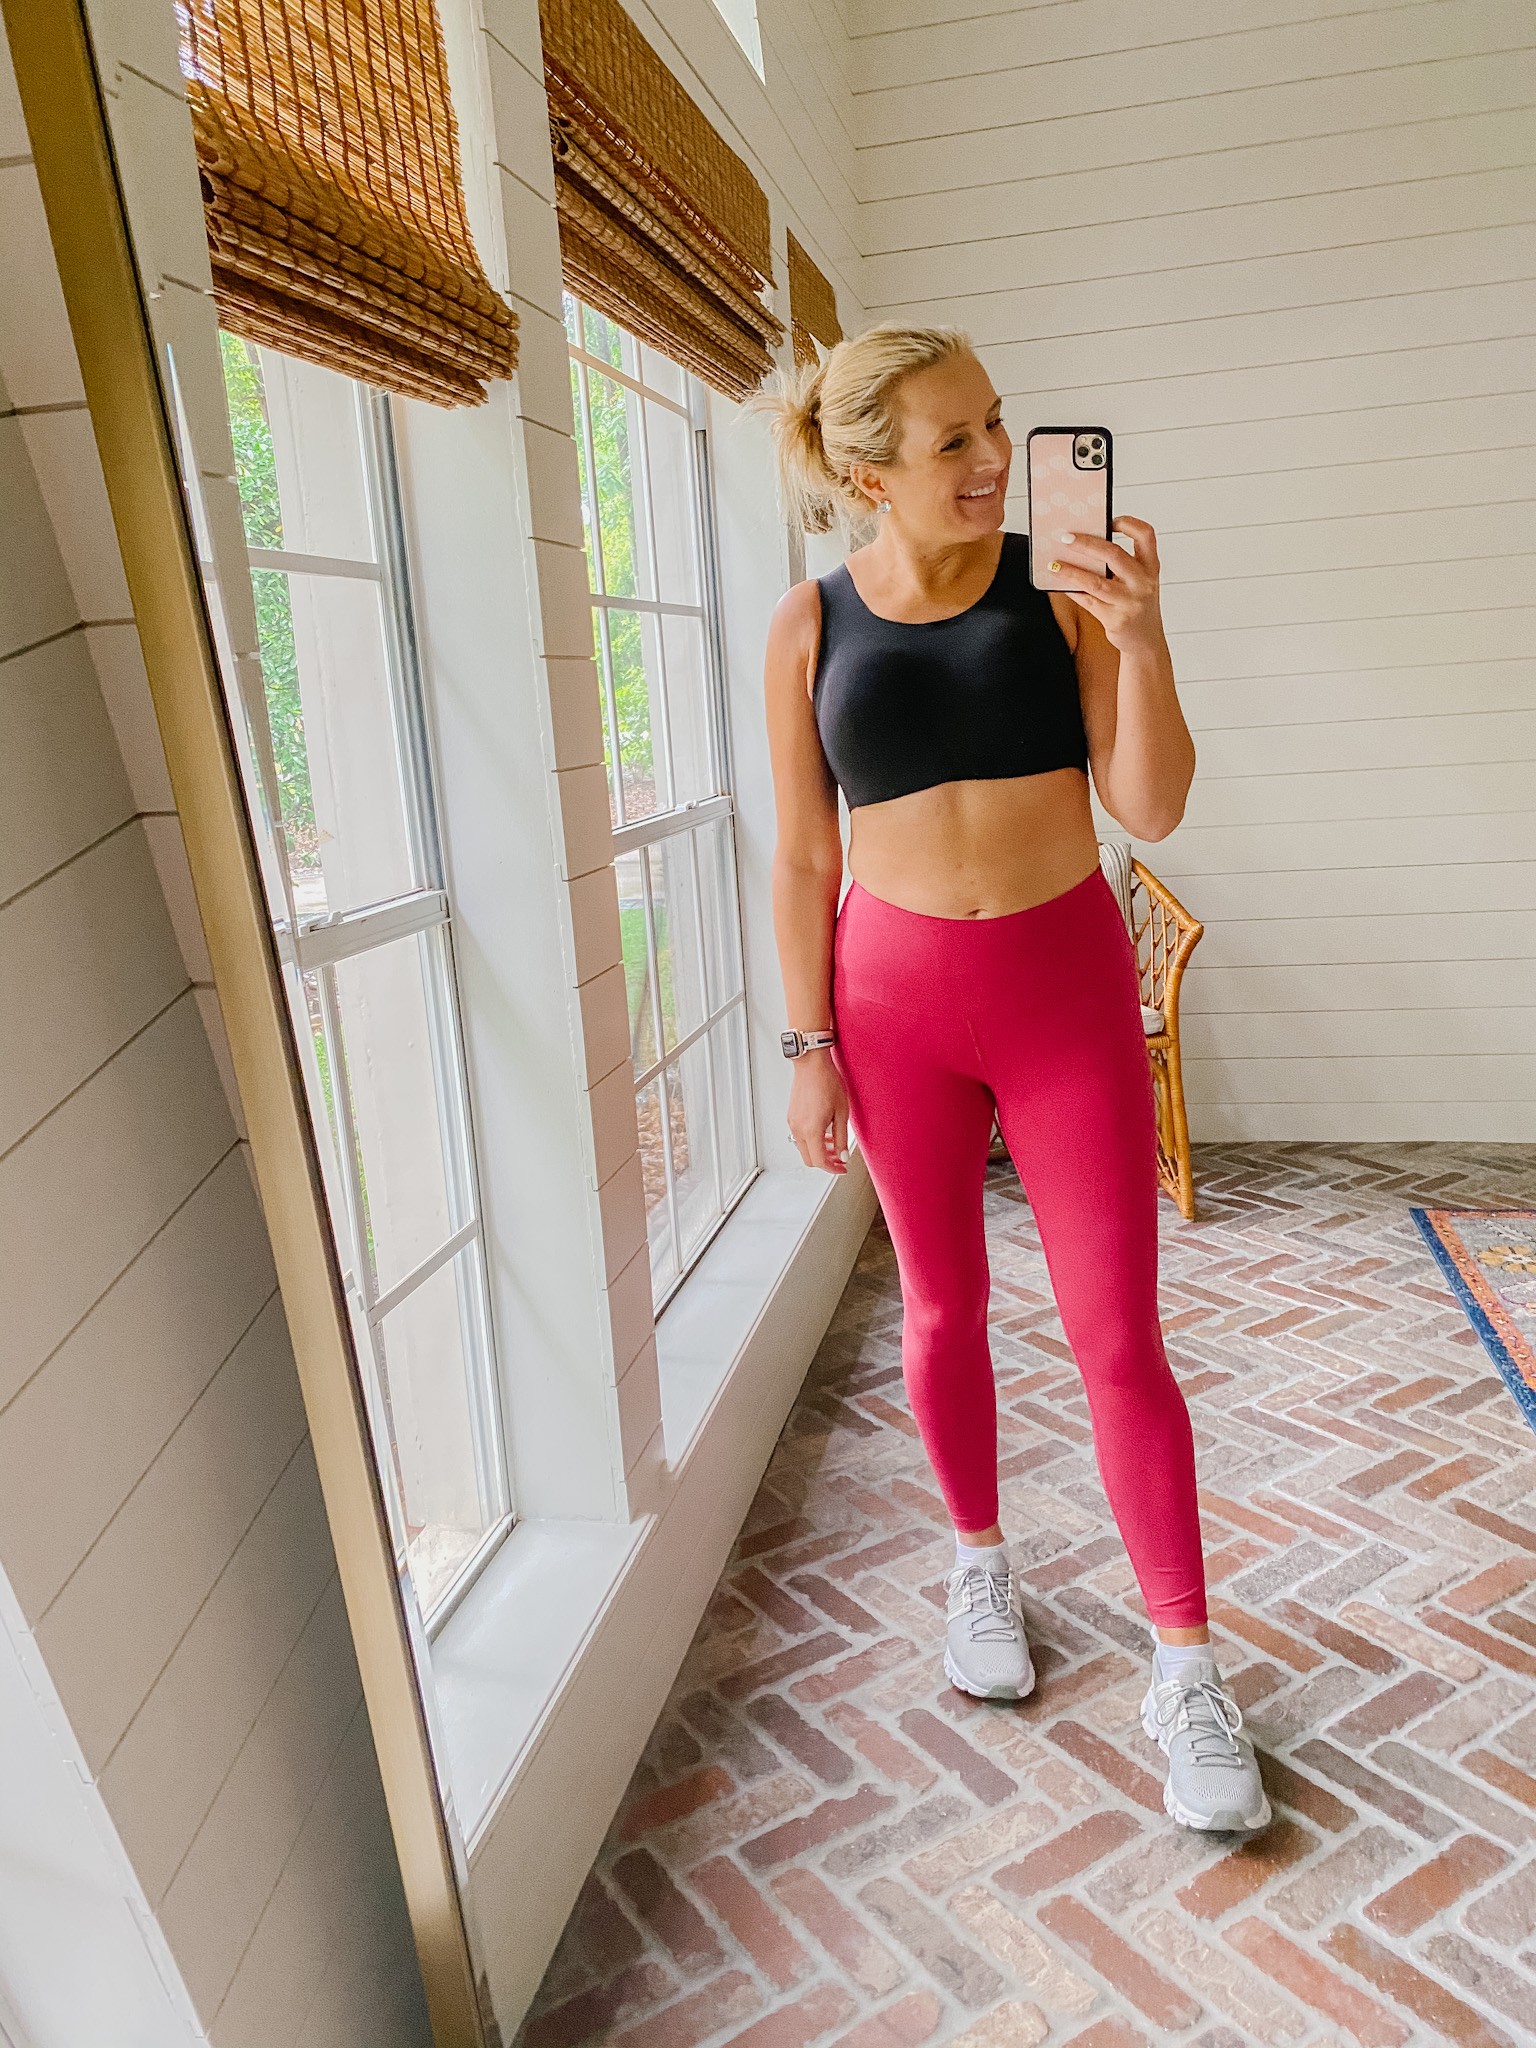 Lululemon Looks for Less featured by top Houston fashion blogger, House of Fancy